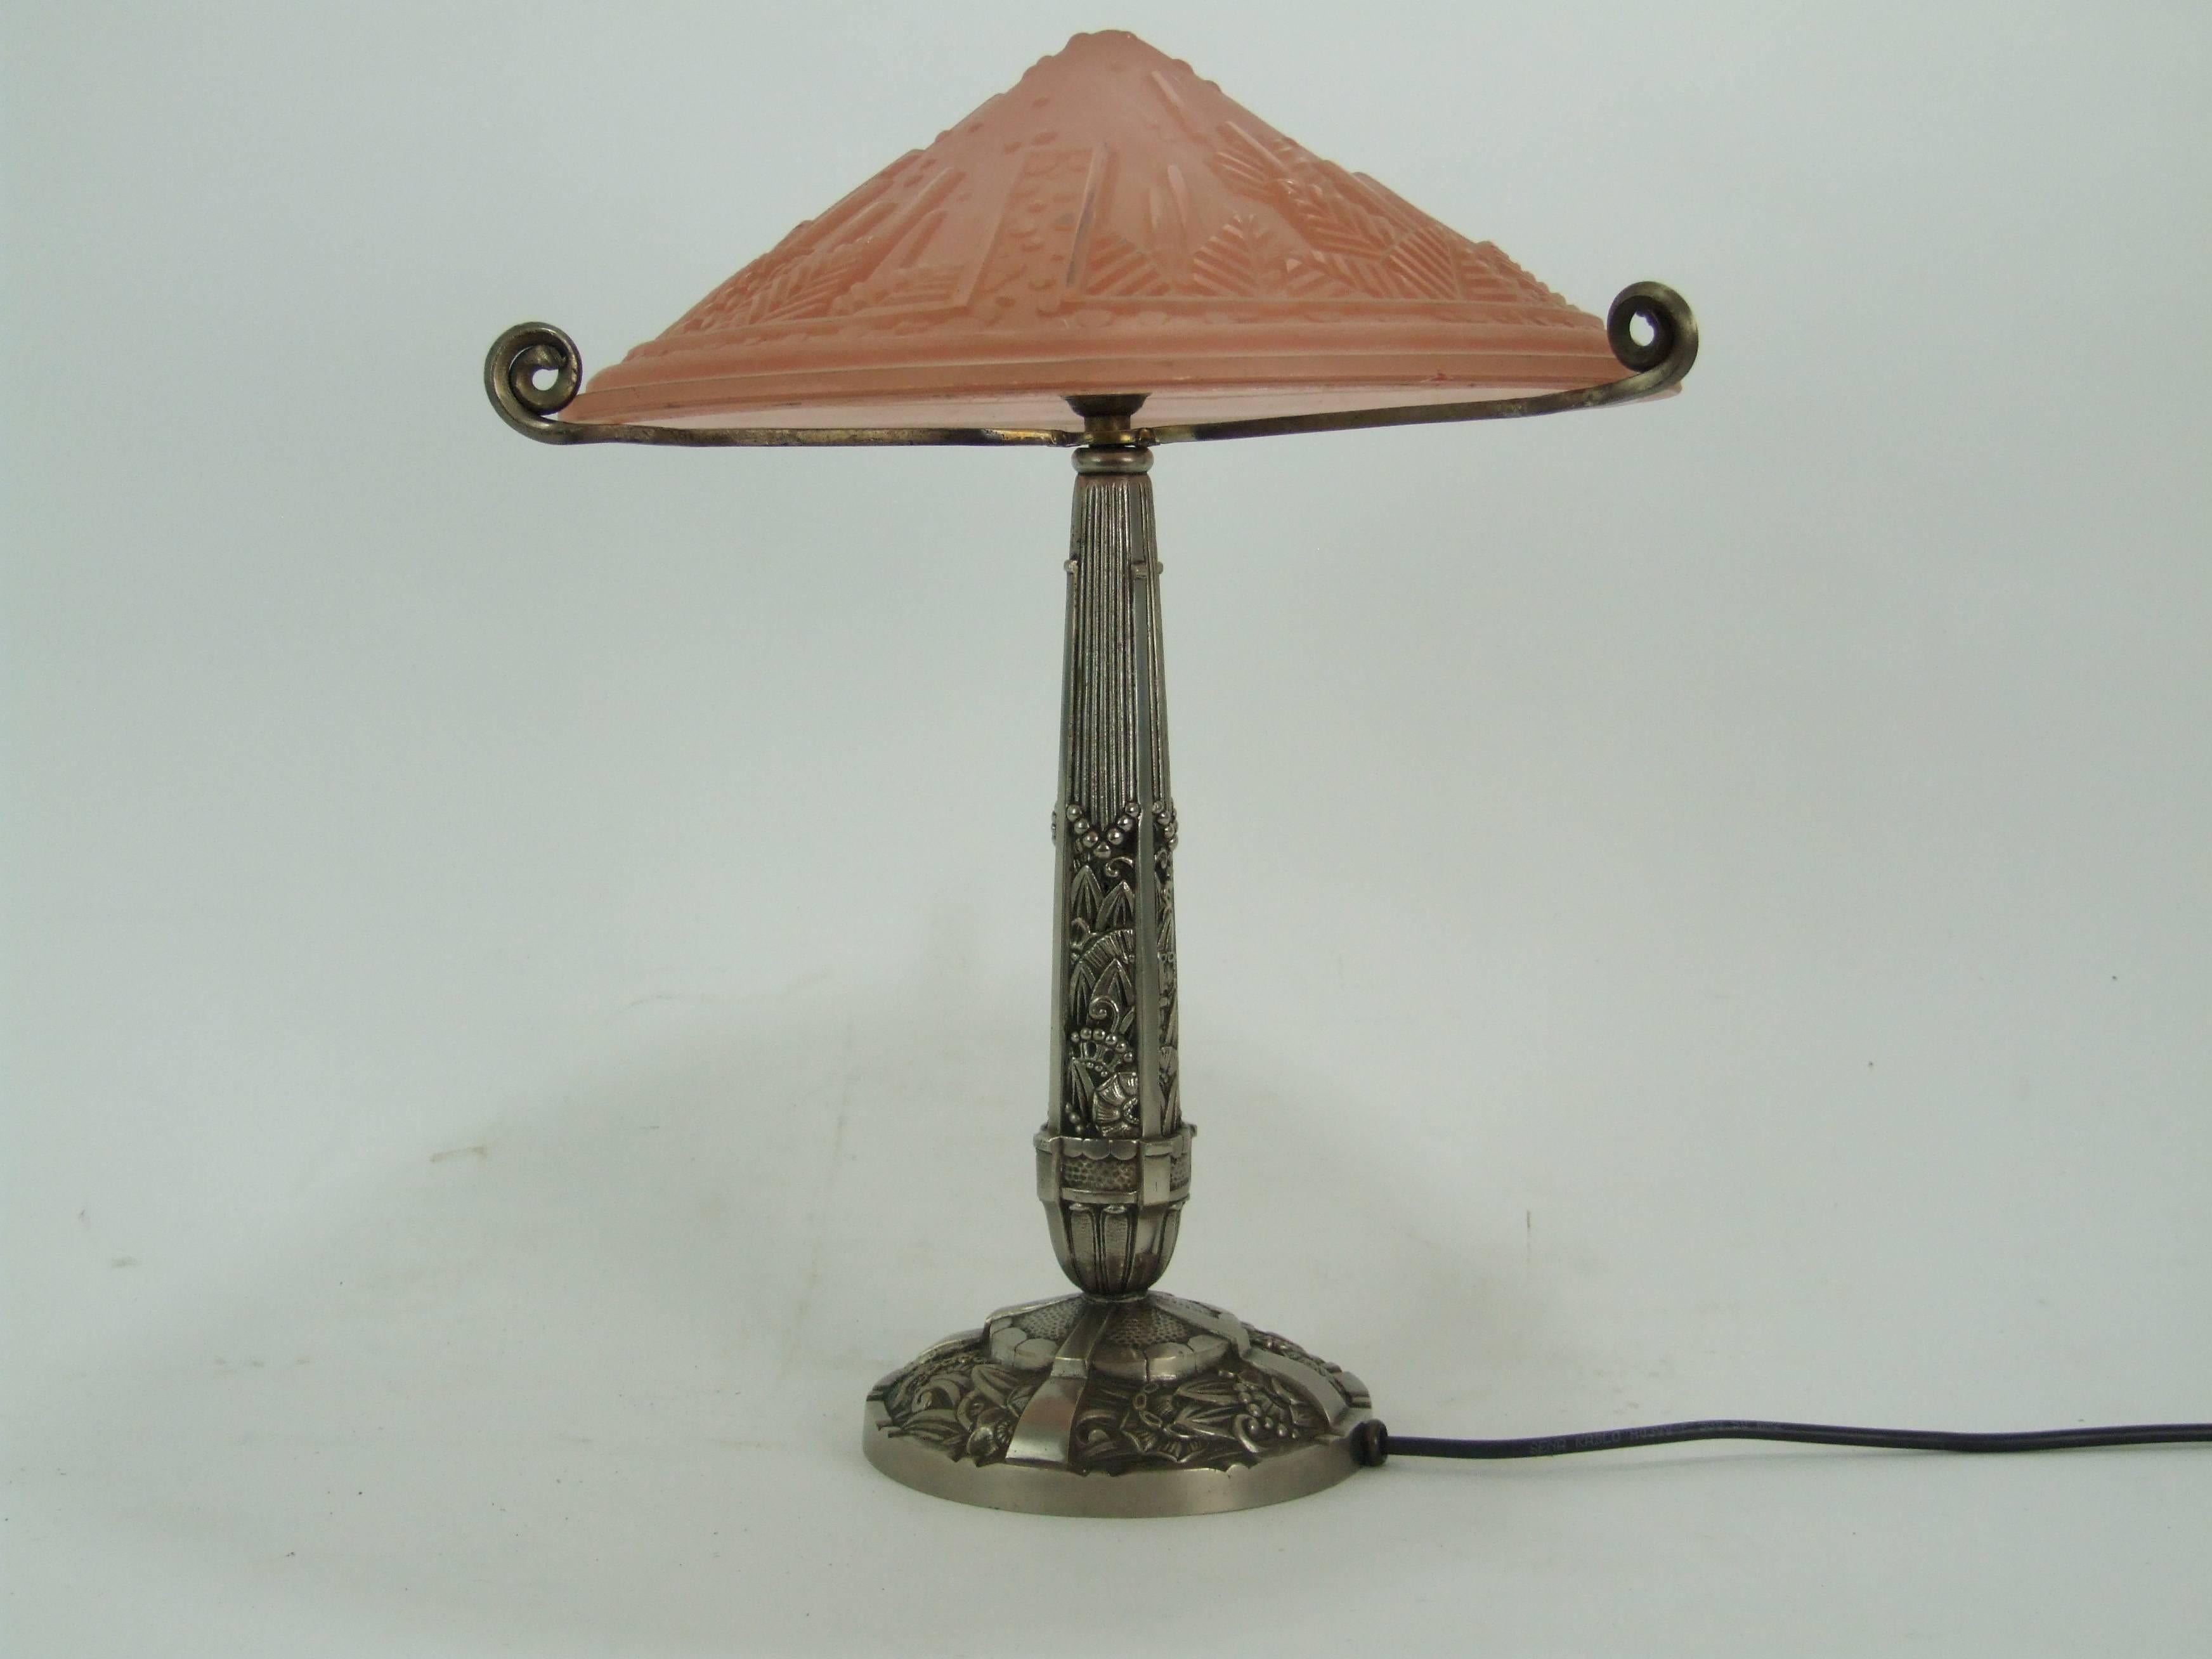 French Art Deco stylized floral silvered bronze Art Deco table lamp. Unsigned but undoubtedly Muller Frere. Peach glass moulded dome shade. It measures 16 inches high 13.5 diameter to the shade (41cm x 34cm). Condition is very good with one very